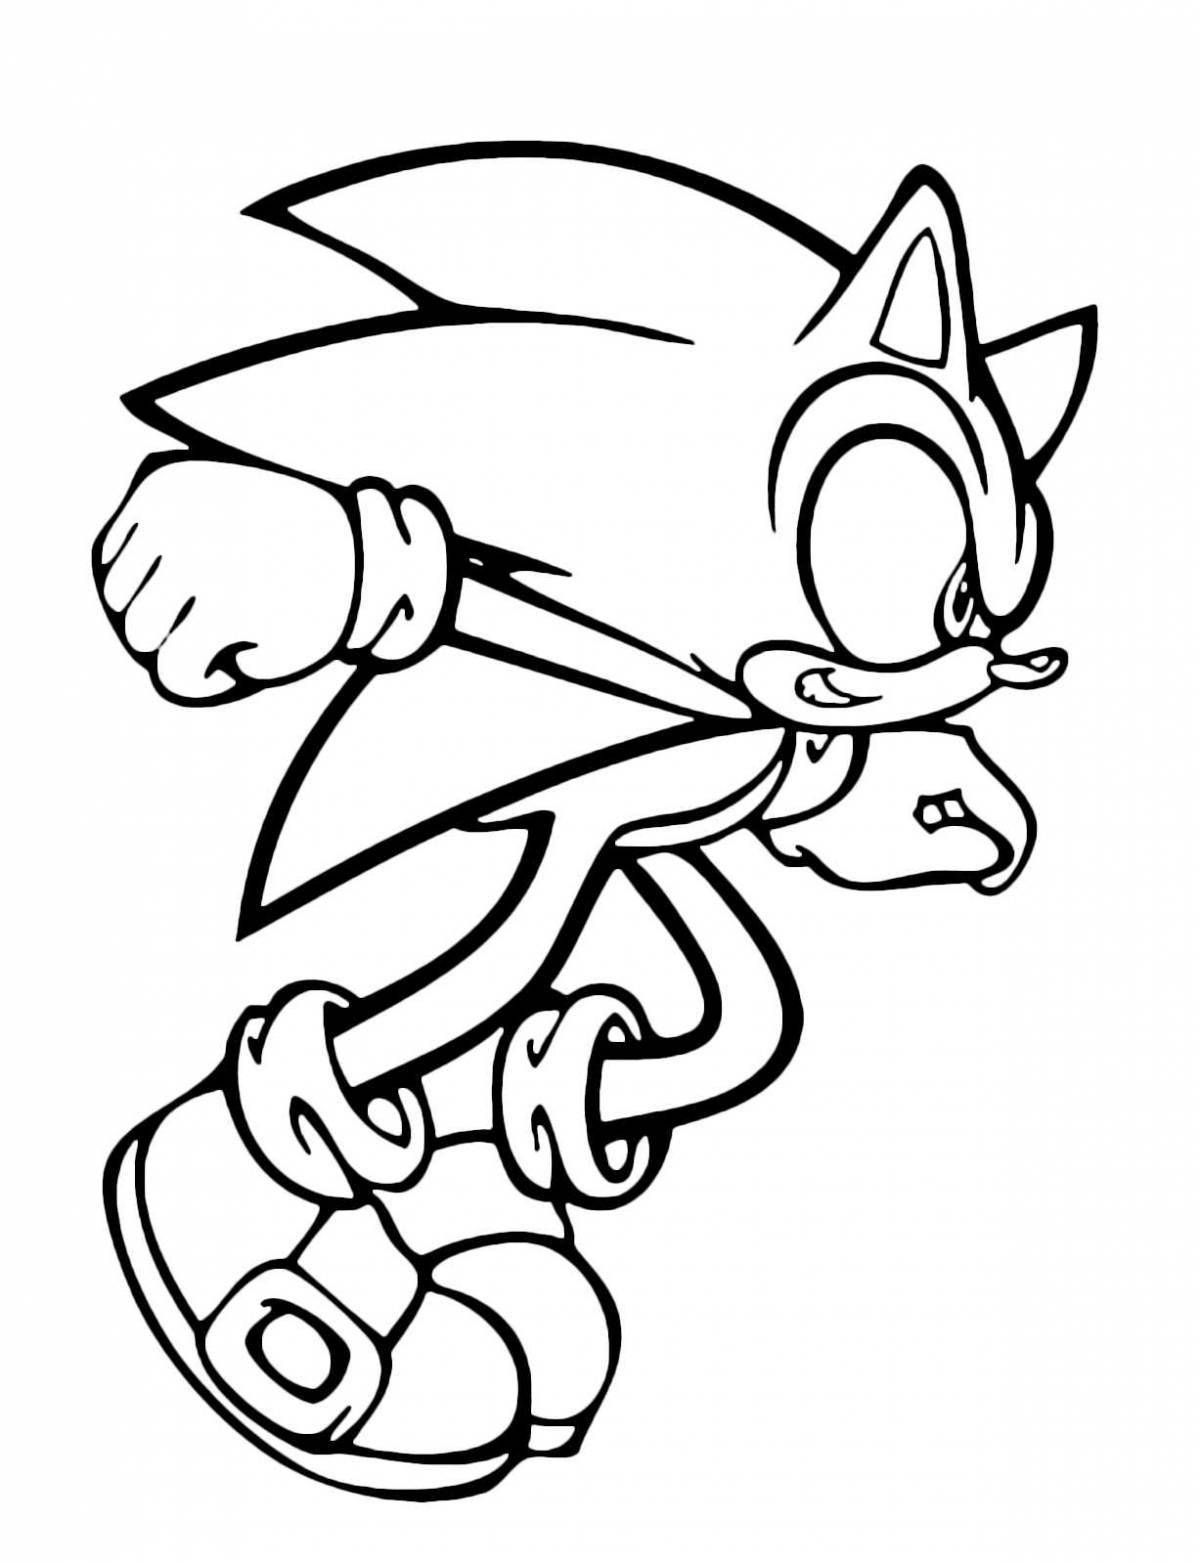 Animated sonic force coloring page